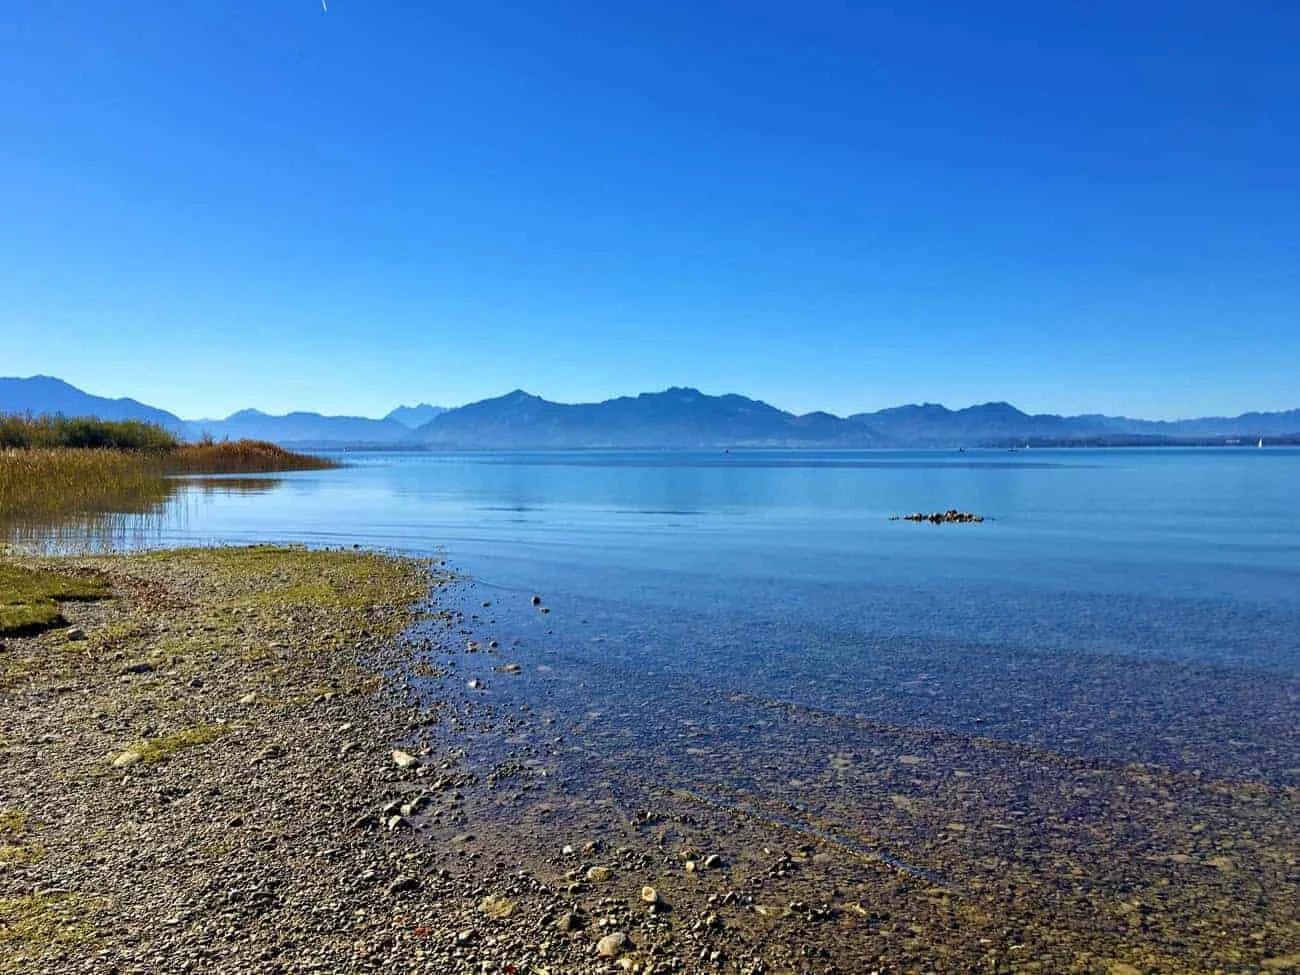 biking-around-the-discovery-of-lake-chiemsee-in-7-days